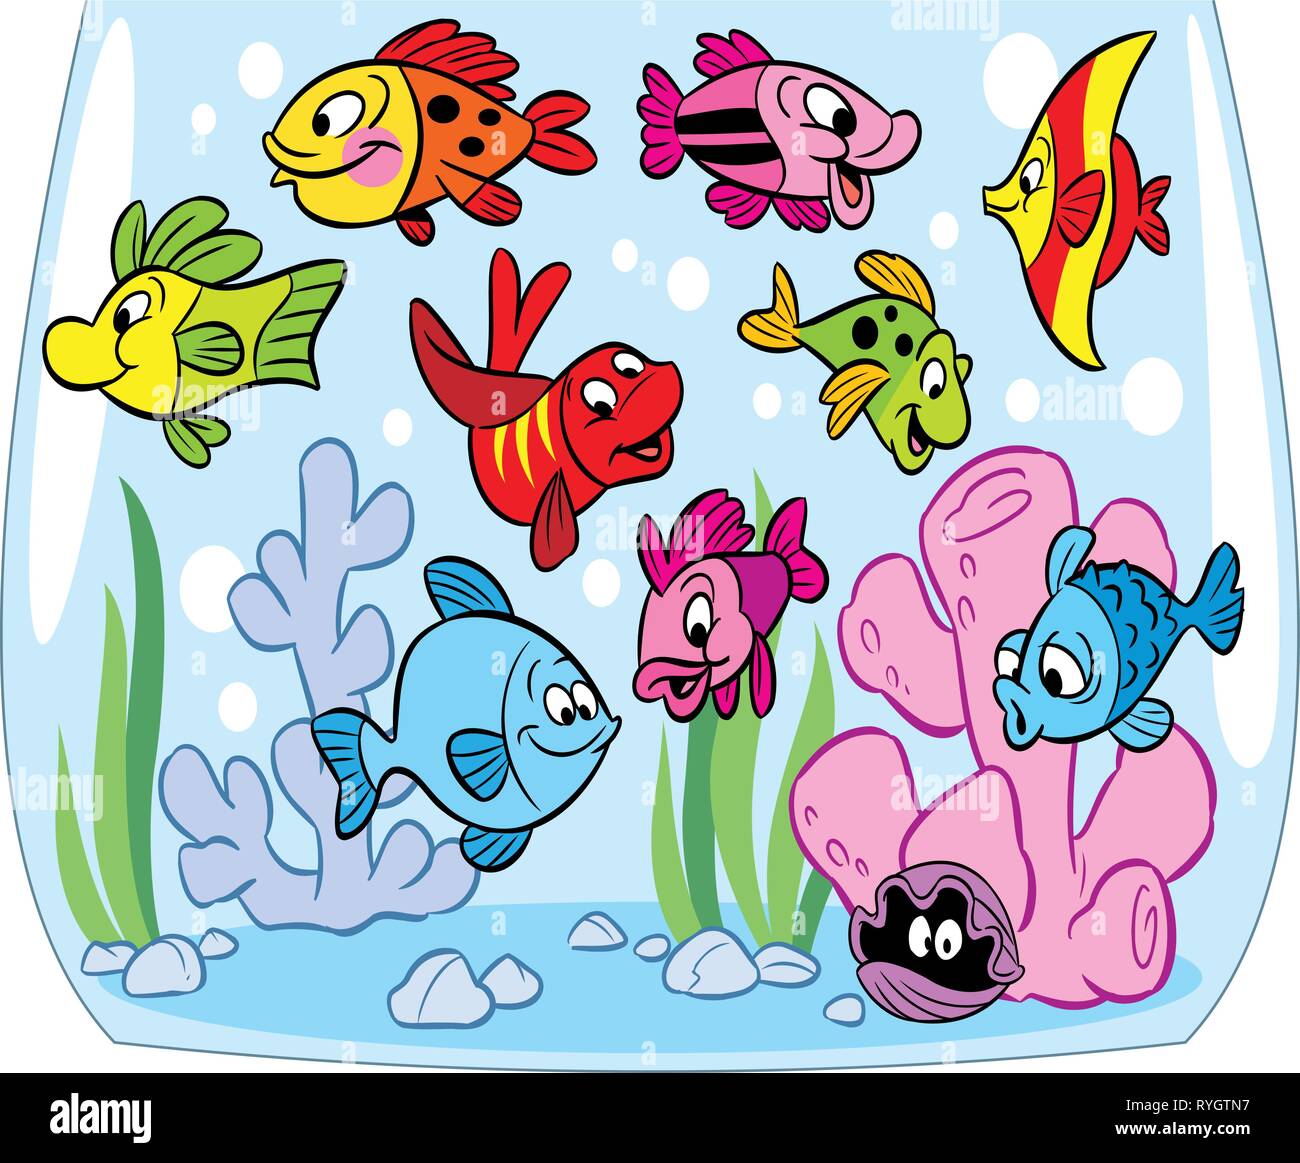 Funny cartoon fish swim in an aquarium. At the bottom of the crab, seaweed and decoration. Illustration done on separate layers. Stock Vector